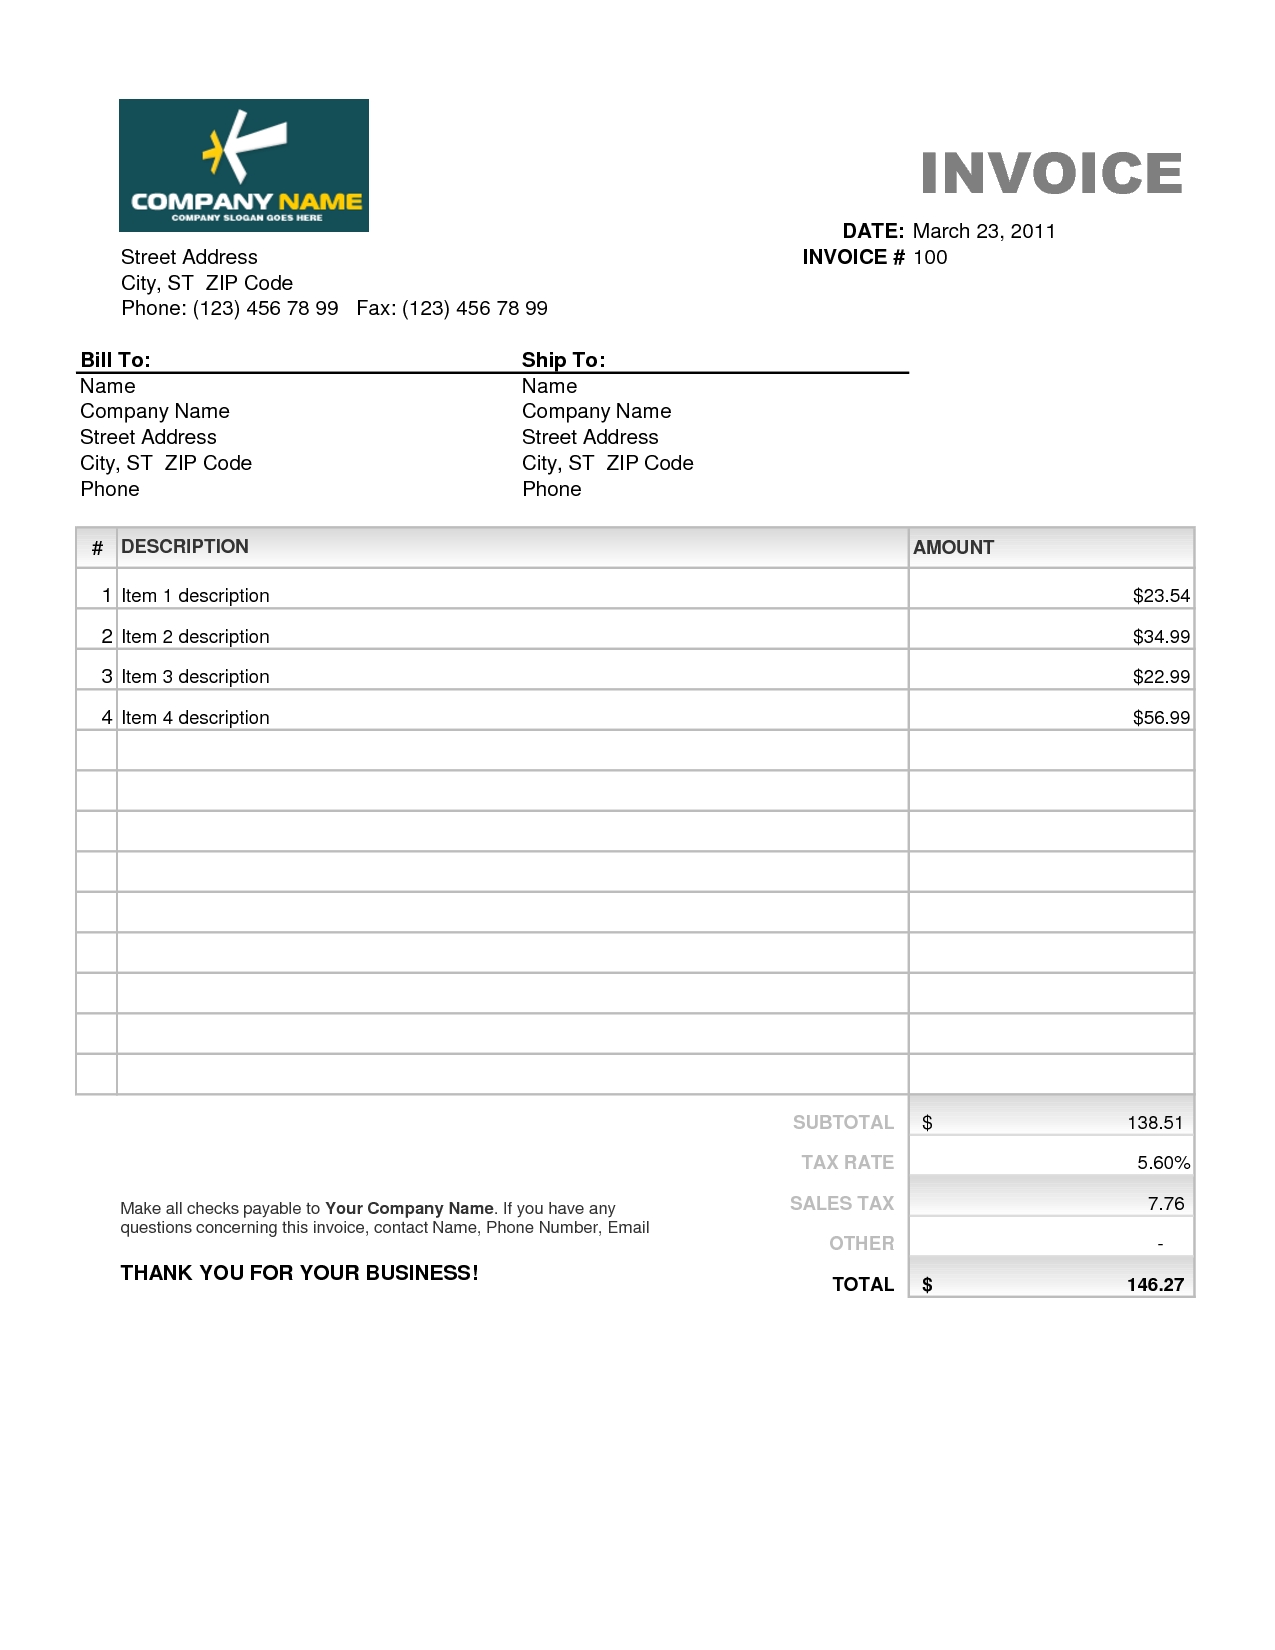 invoice format download invoice template excel dhuidddynu 1275 X 1650